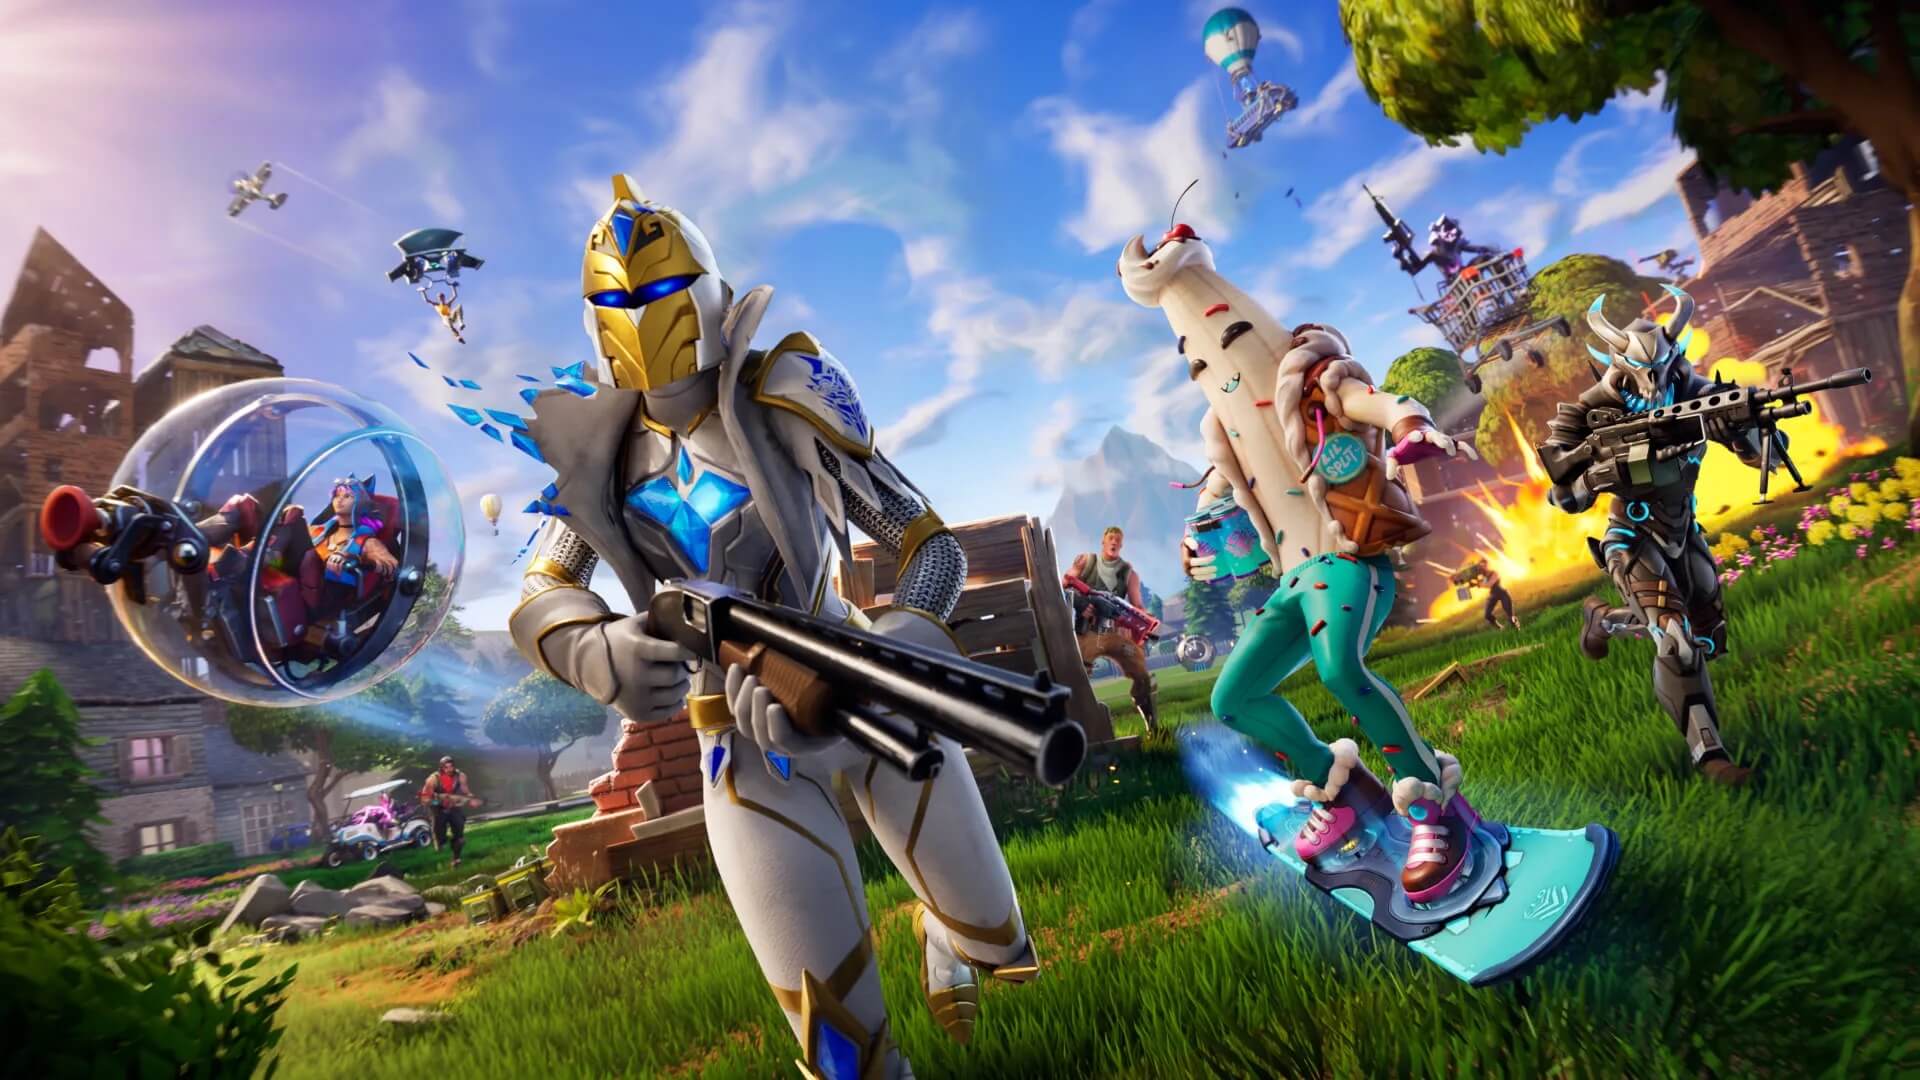 How to download Fortnite on Mac, PC, Xbox and PS4 FREE, Gaming, Entertainment